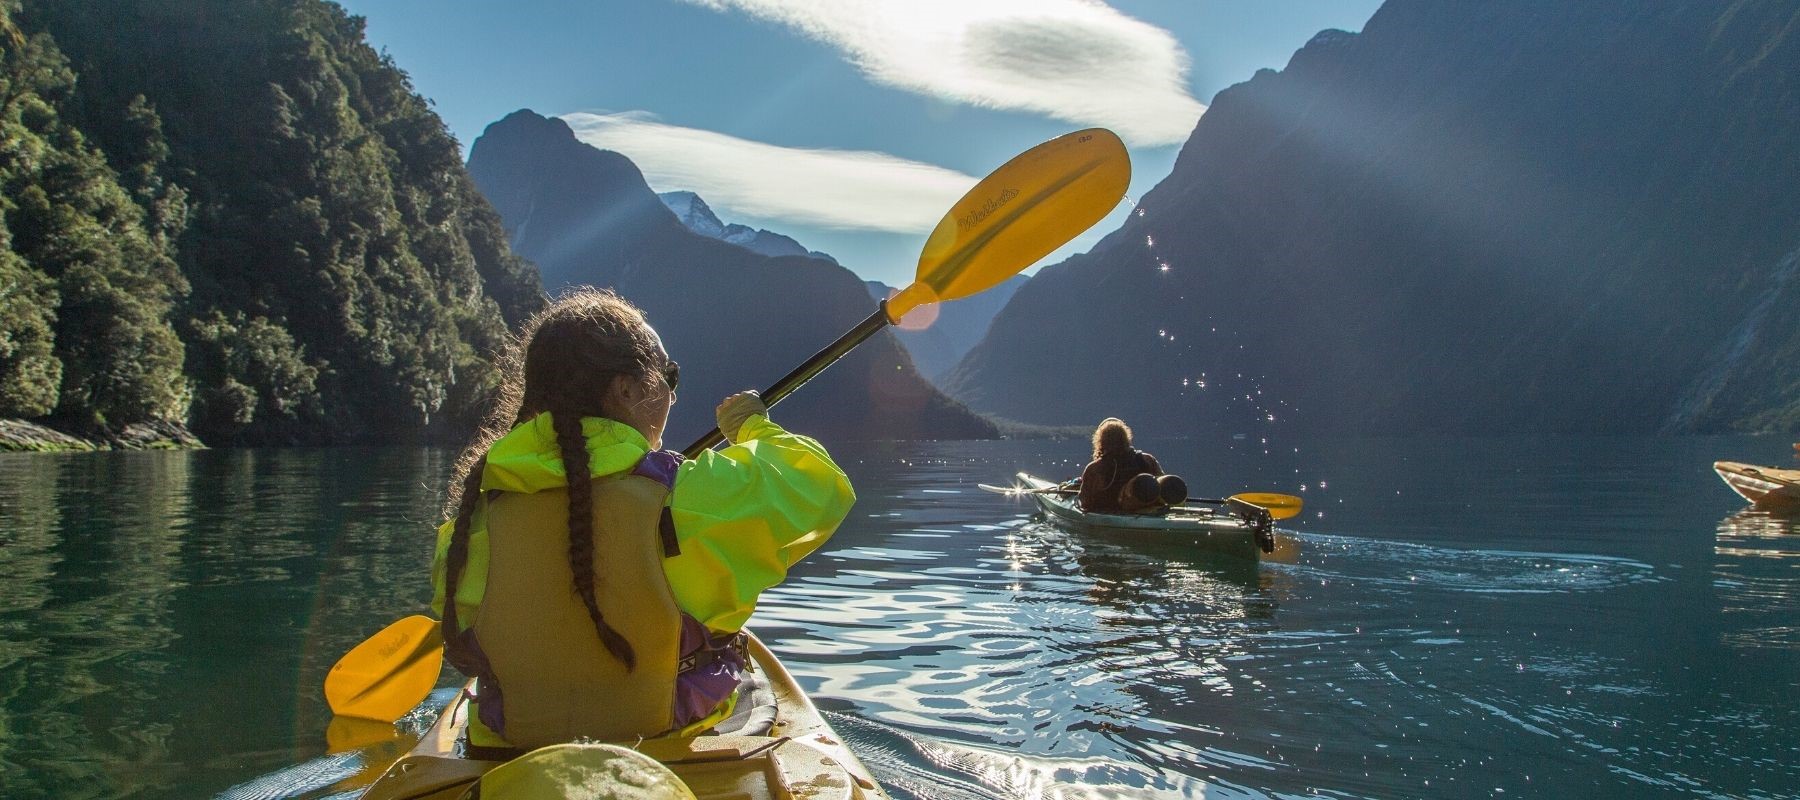 Three kayakers paddle through the Milford Sound on a sunny day from Milford Sound Lodge.